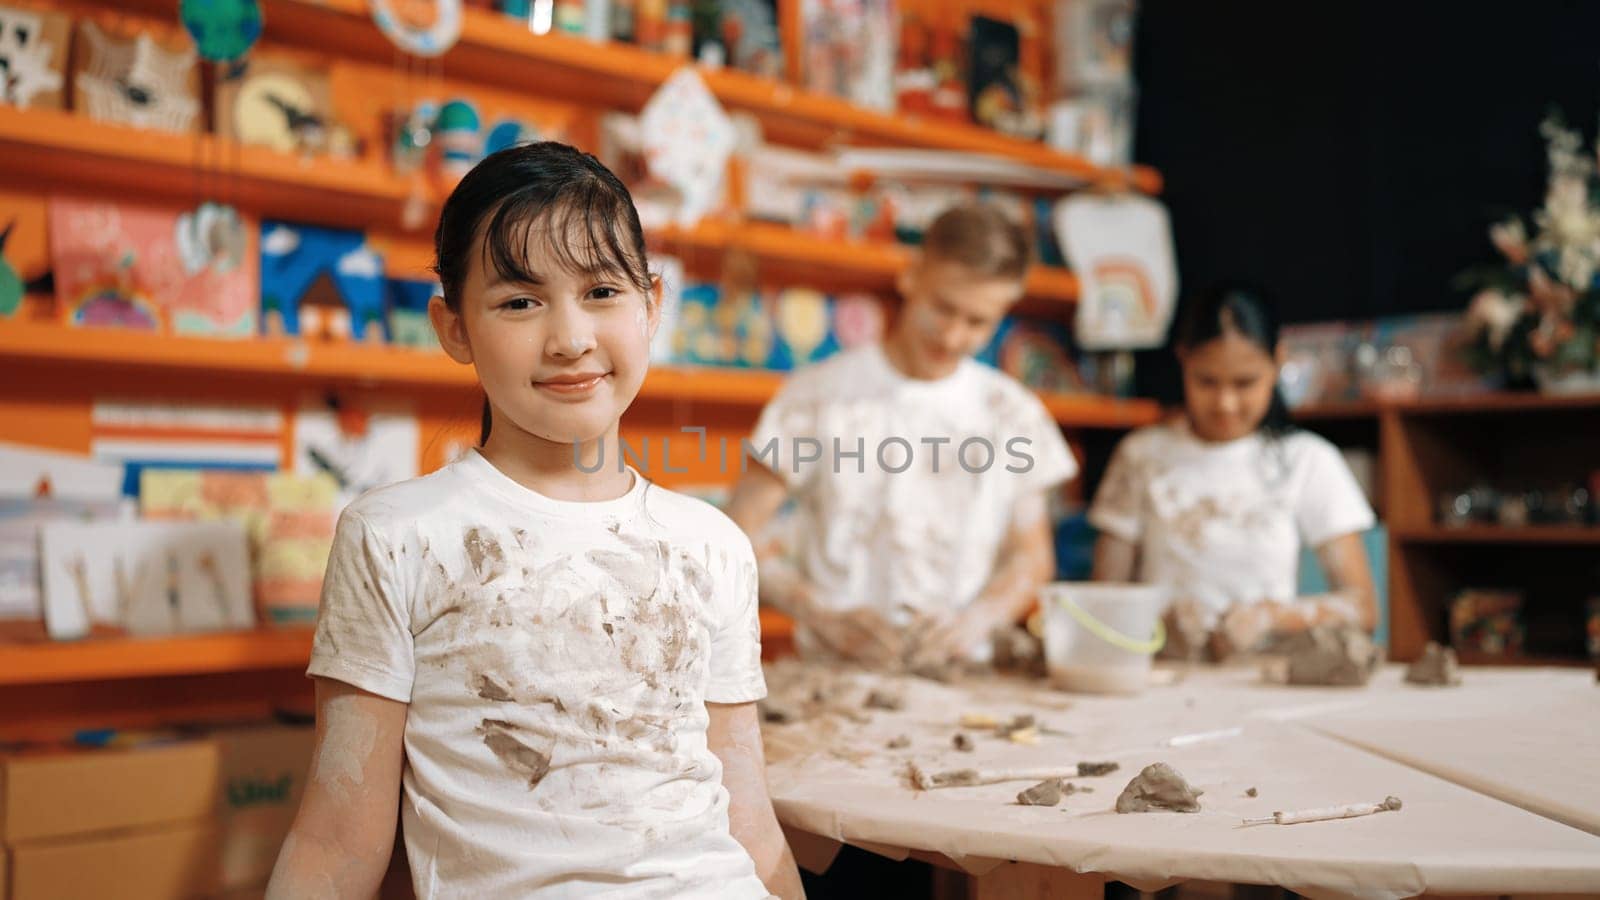 Asian highschool girl look at camera and dirty hand while diverse children modeling clay behind. Happy cute student wearing shirt while looking at camera at workshop. Blurring background. Edification.